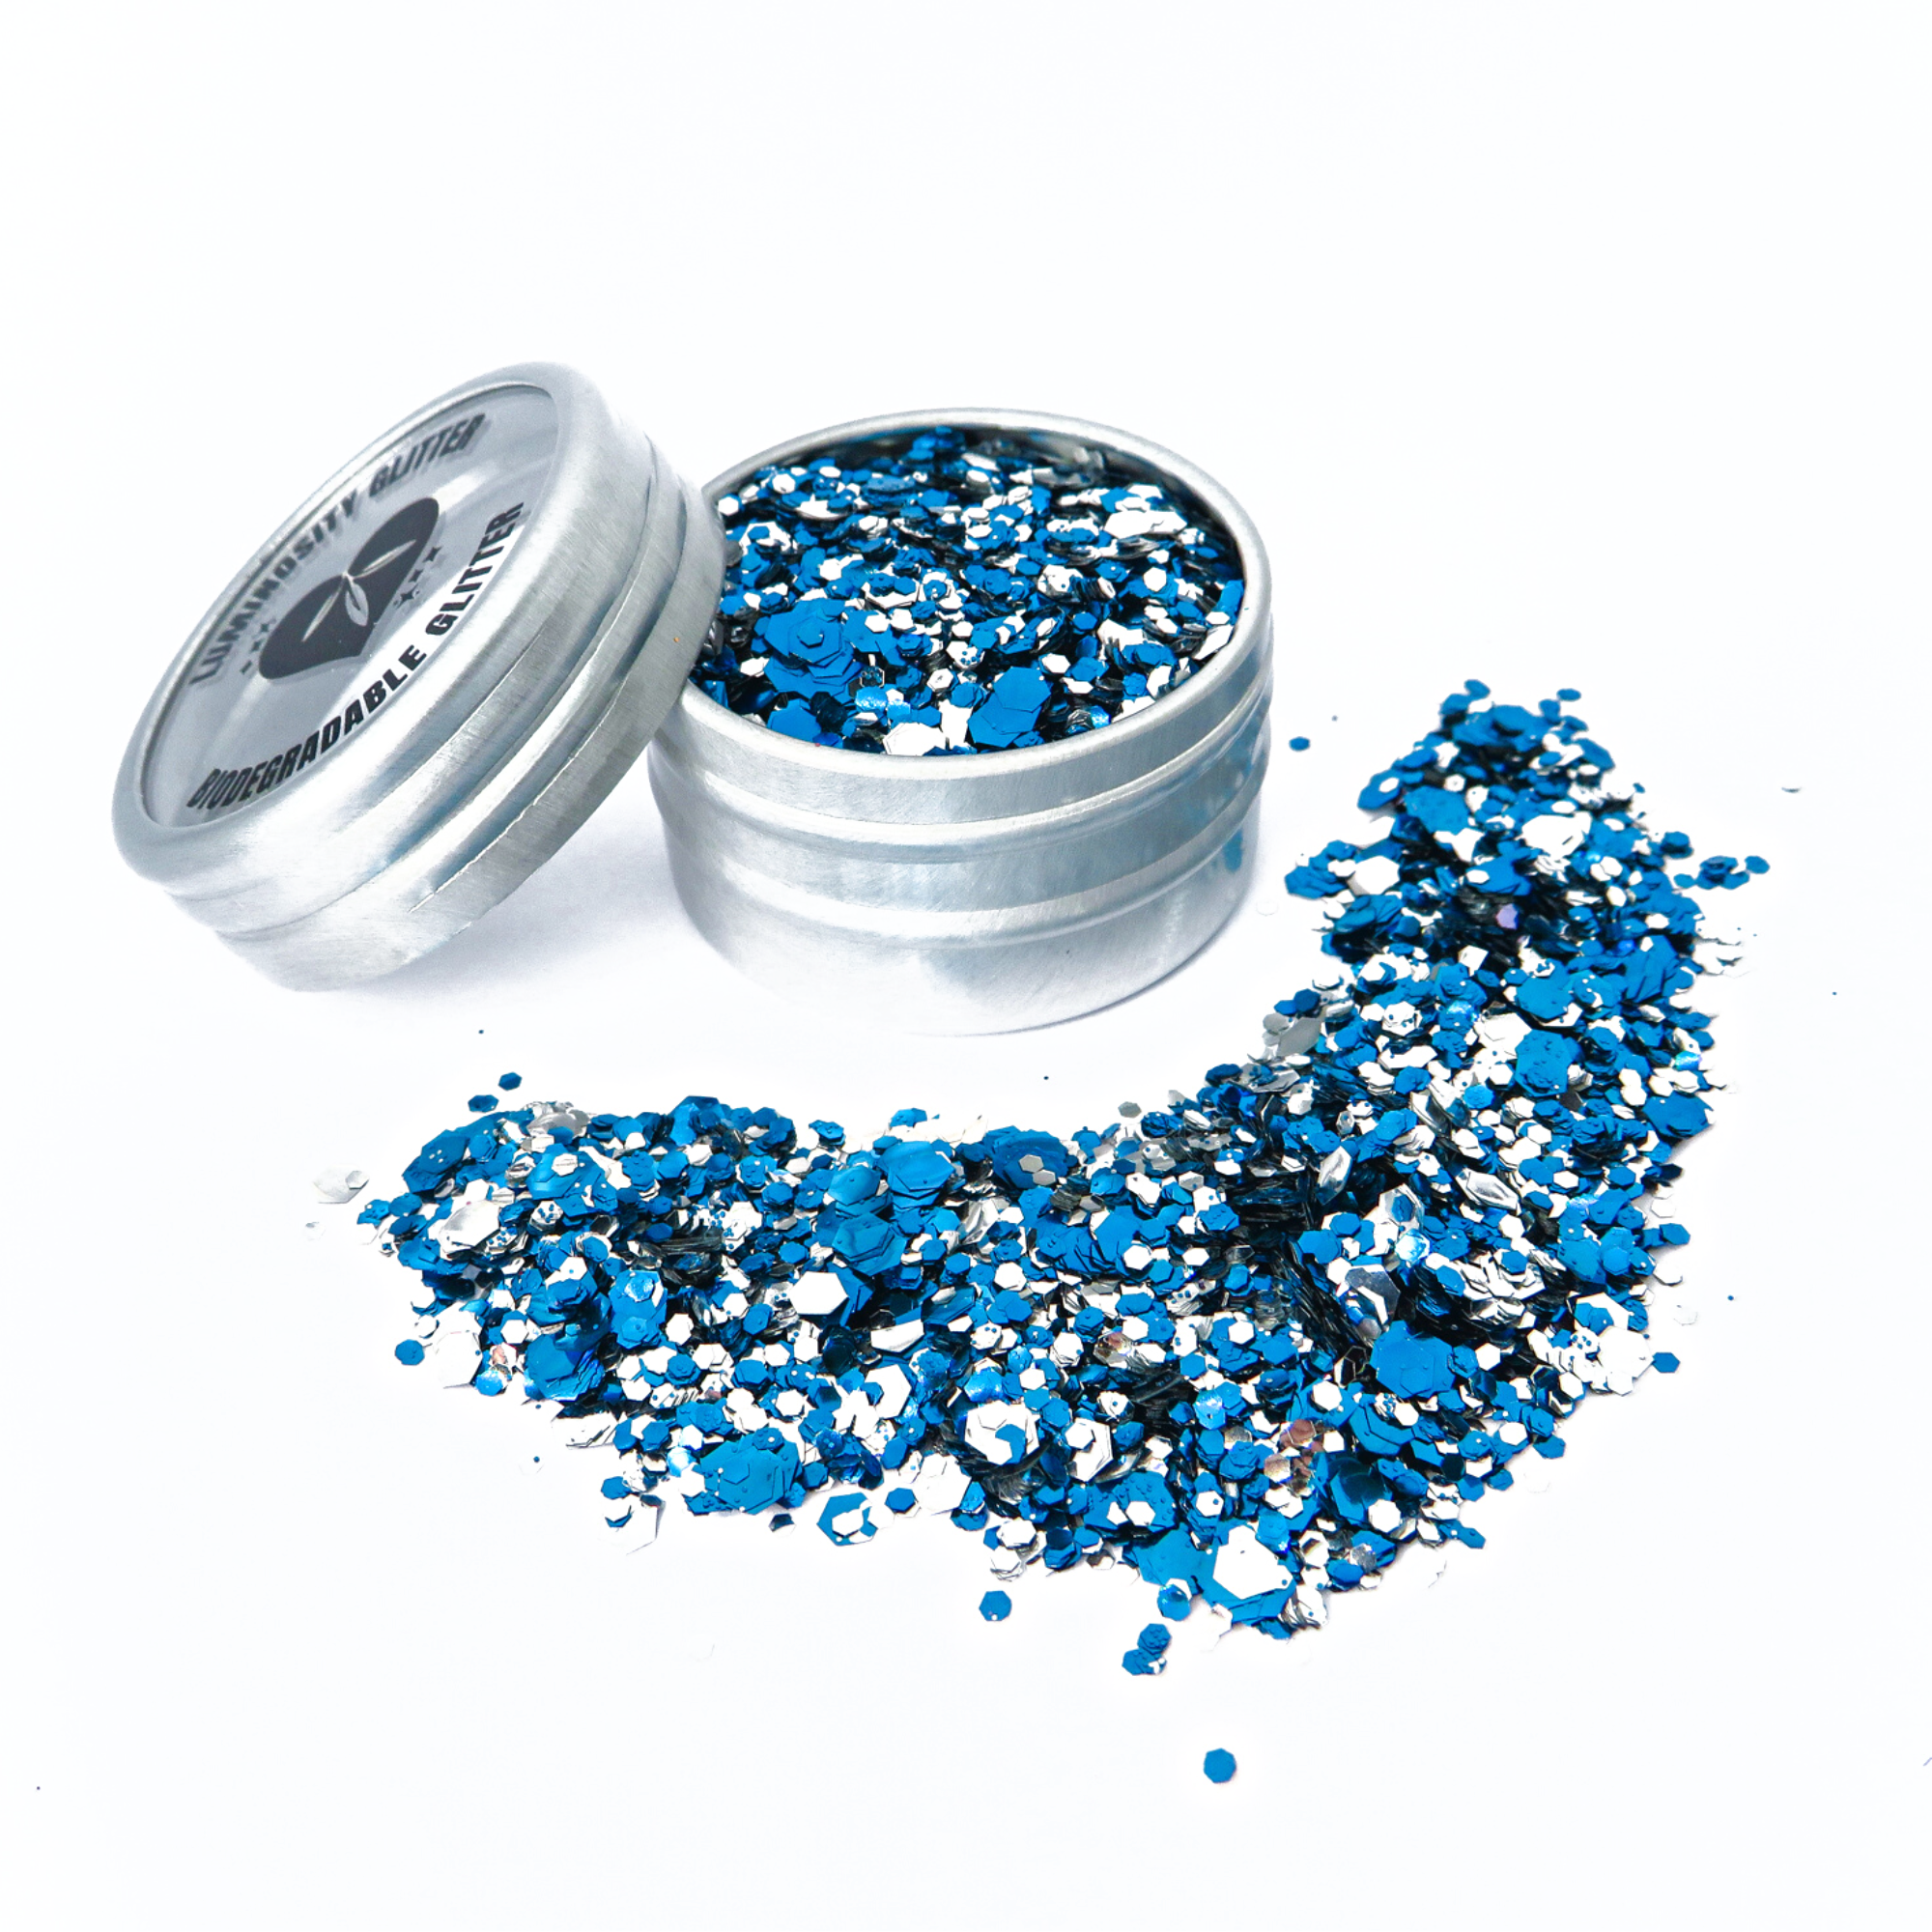 Moon river mix of silver and blue eco friendly cosmetic glitter that biodegrades quickly in a natural environment